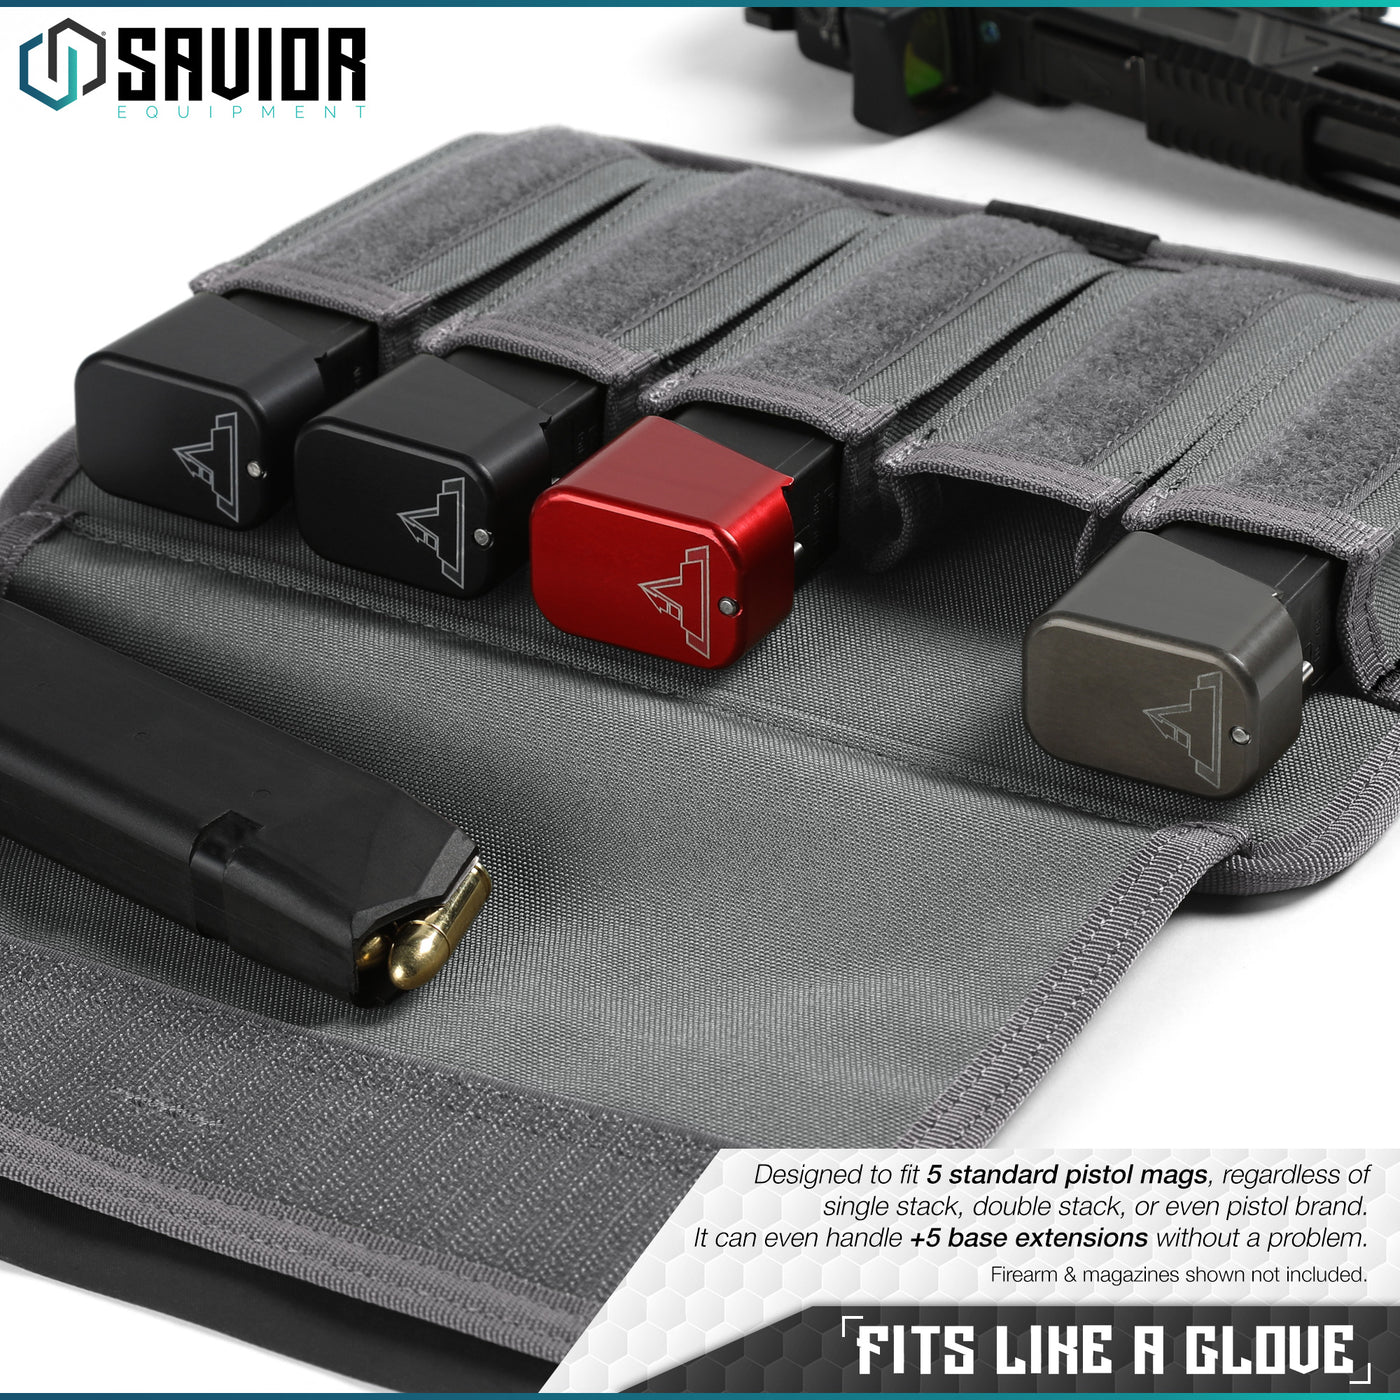 Fits Like A Glove - Designed to fit 5 standard pistol mags, regardless of single stack, double stack, or even pistol brand. It can even handle +5 base extensions without a problem. Firearms & magazines shown not included.